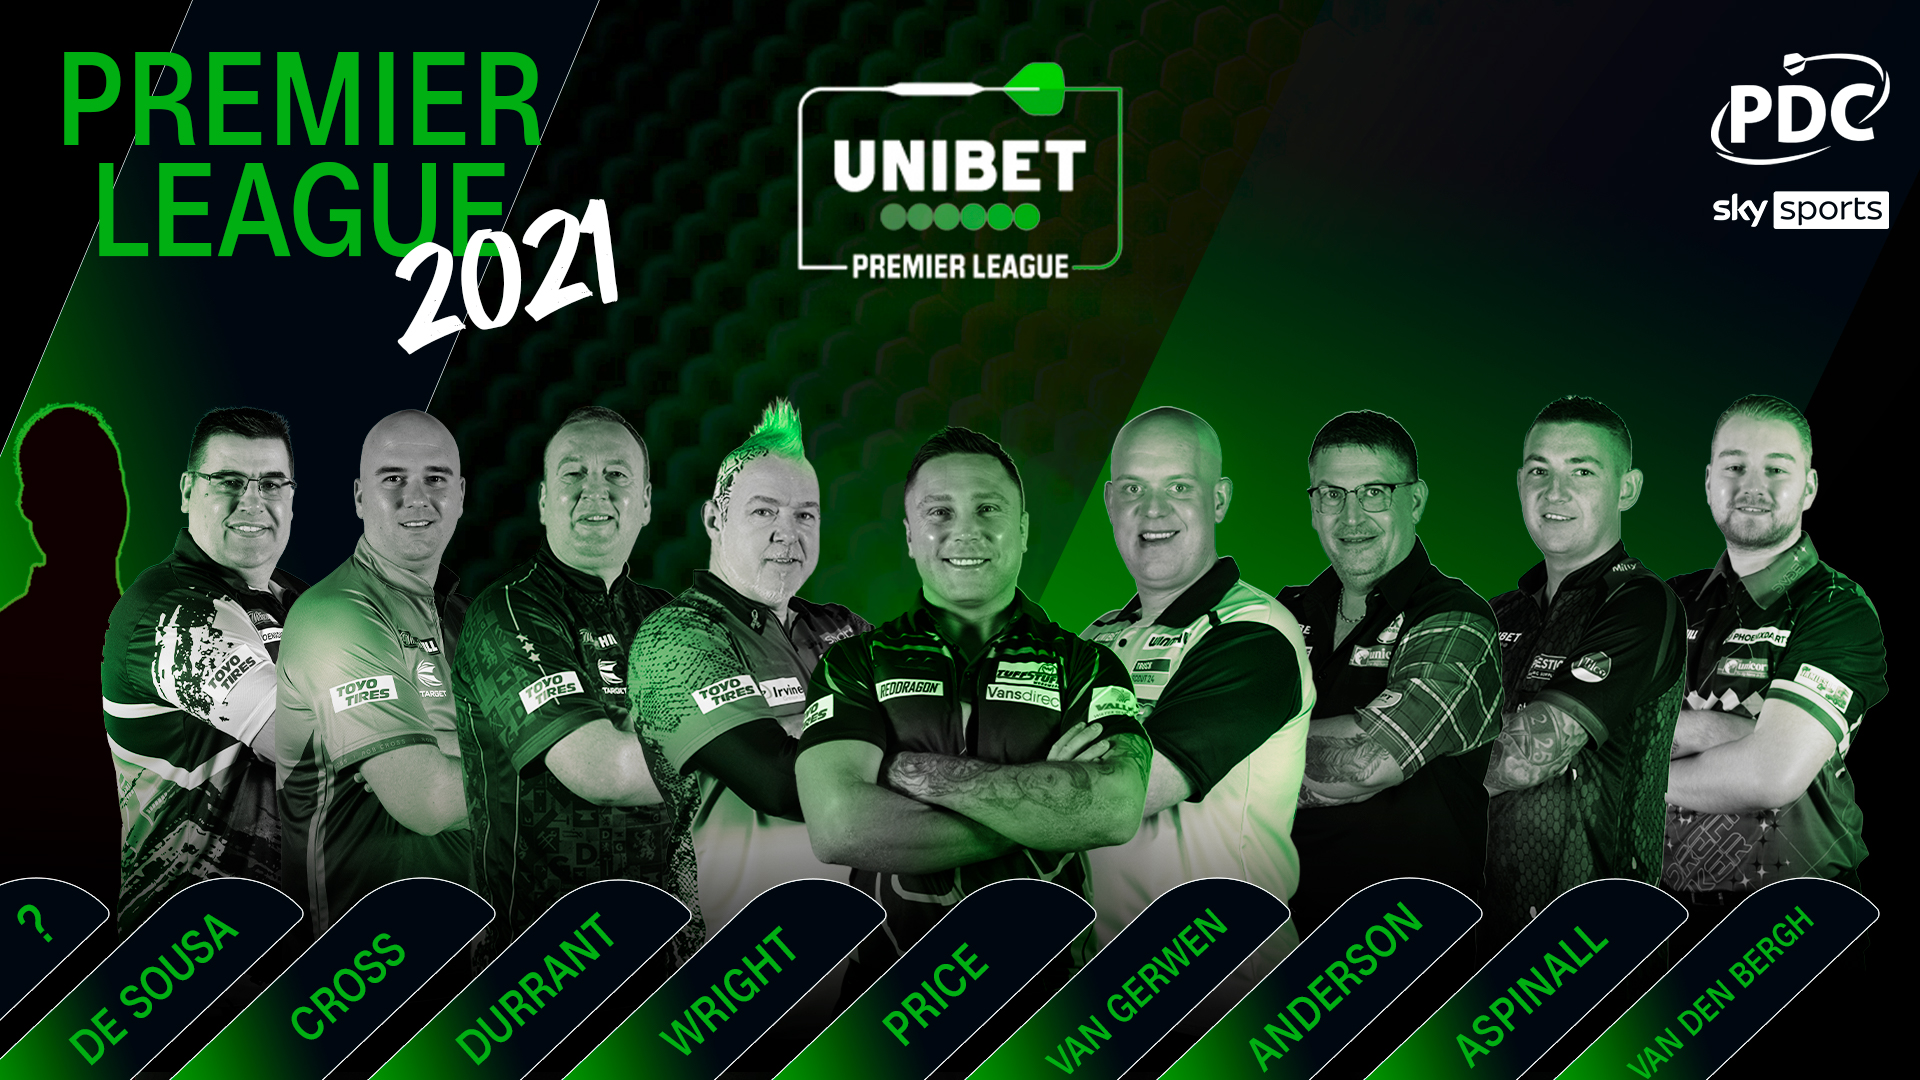 PDC Darts on Twitter: "𝗧𝗵𝗲 𝗰𝗹𝗮𝘀𝘀 𝗼𝗳 𝟮𝟬𝟮𝟭 The @unibet Premier League for 2021... Nine players confirmed, with one more to follow! https://t.co/i1ZURt4MOV" / Twitter